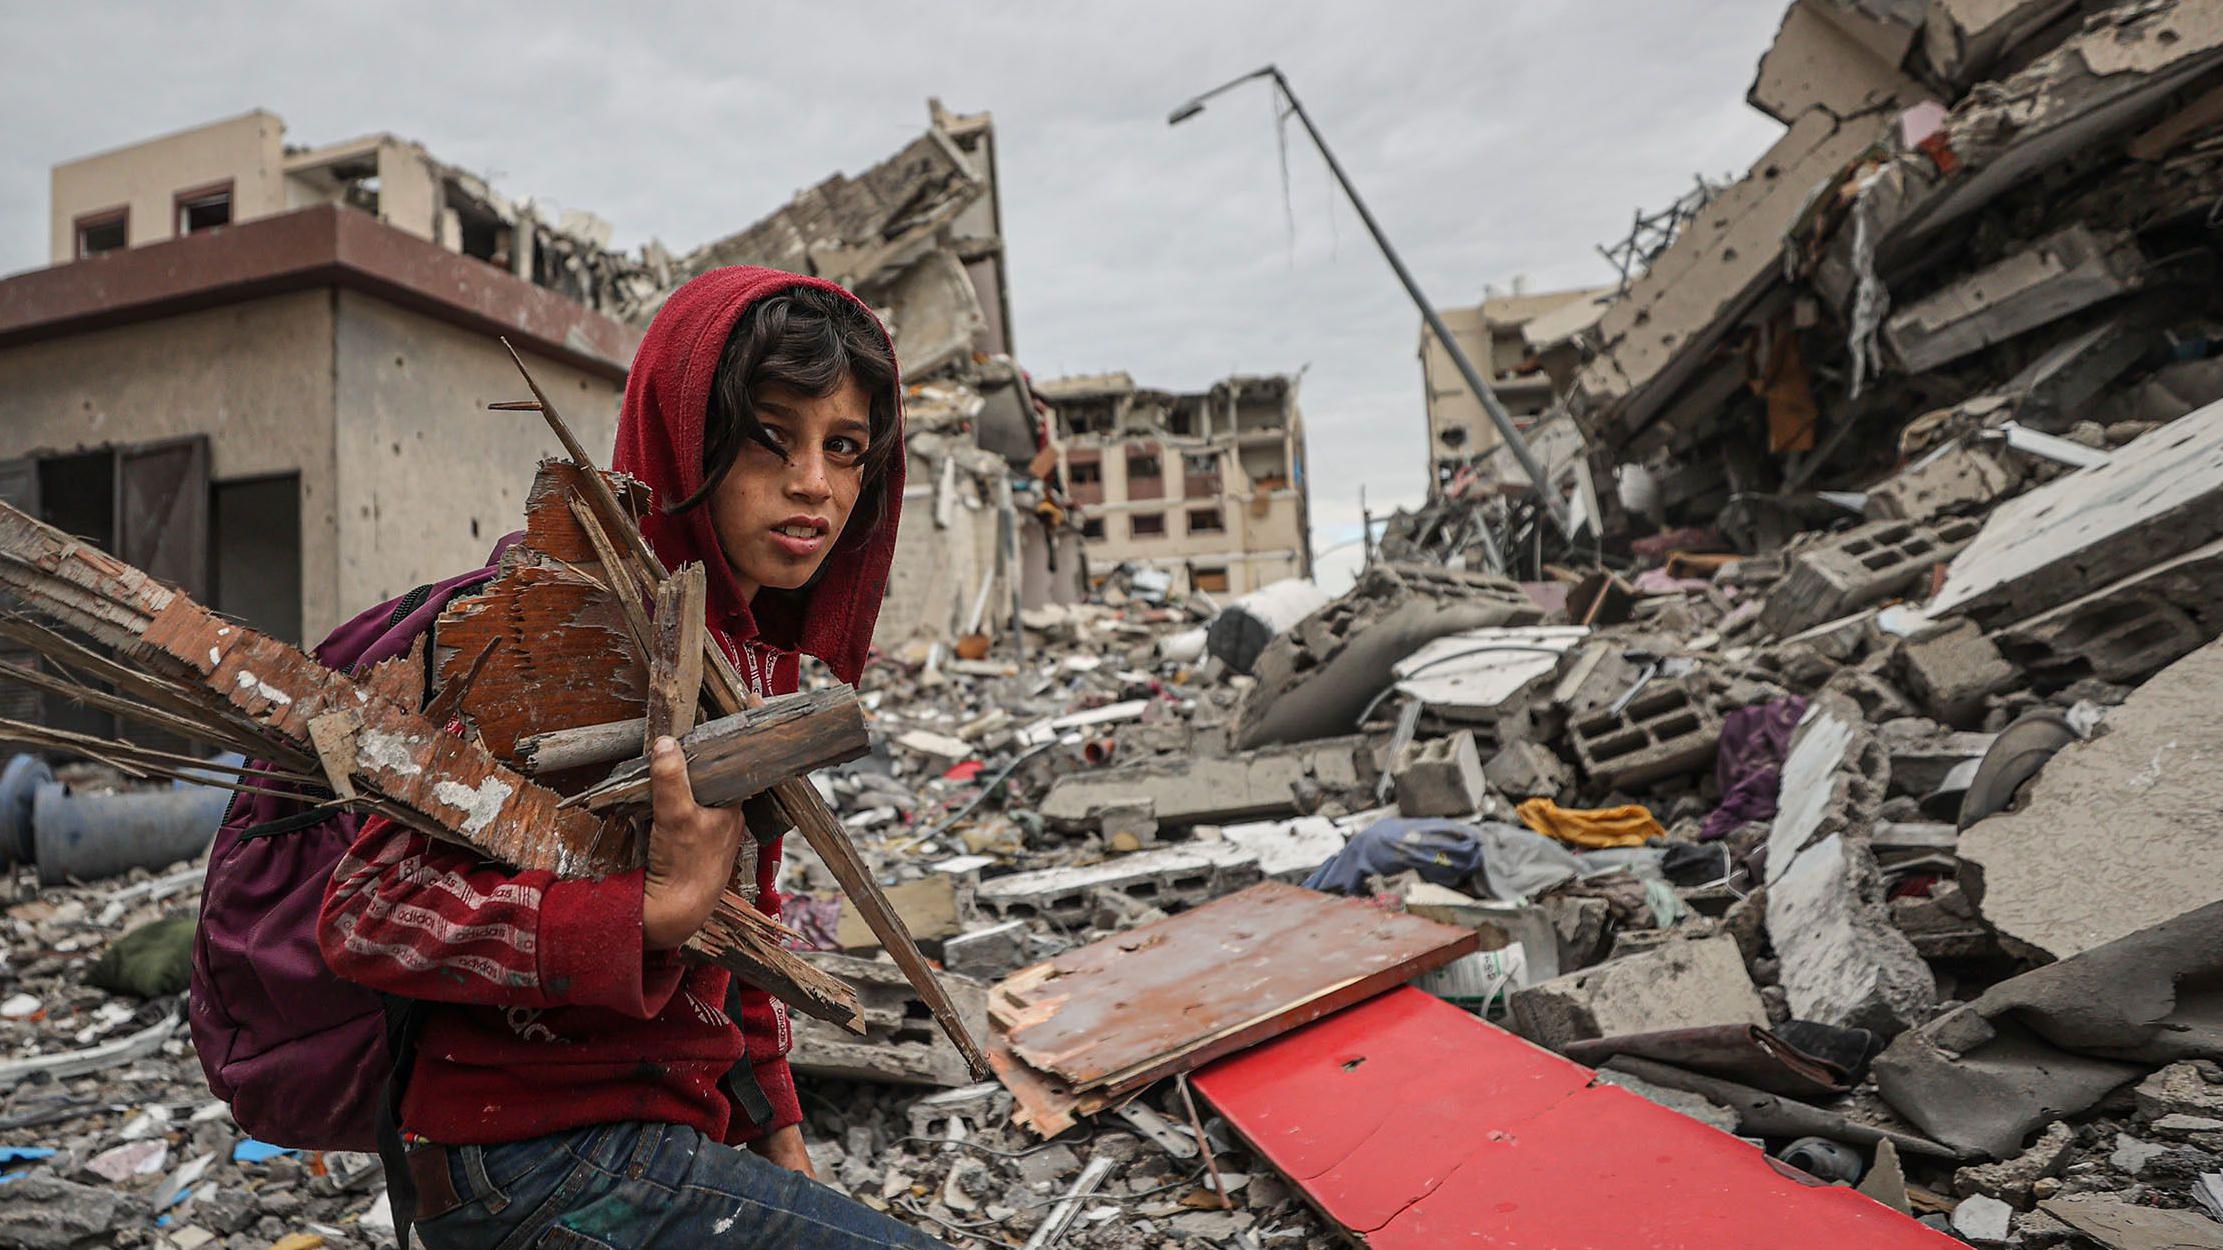 One boy collect firewood inside destroyed buildings for Gaza